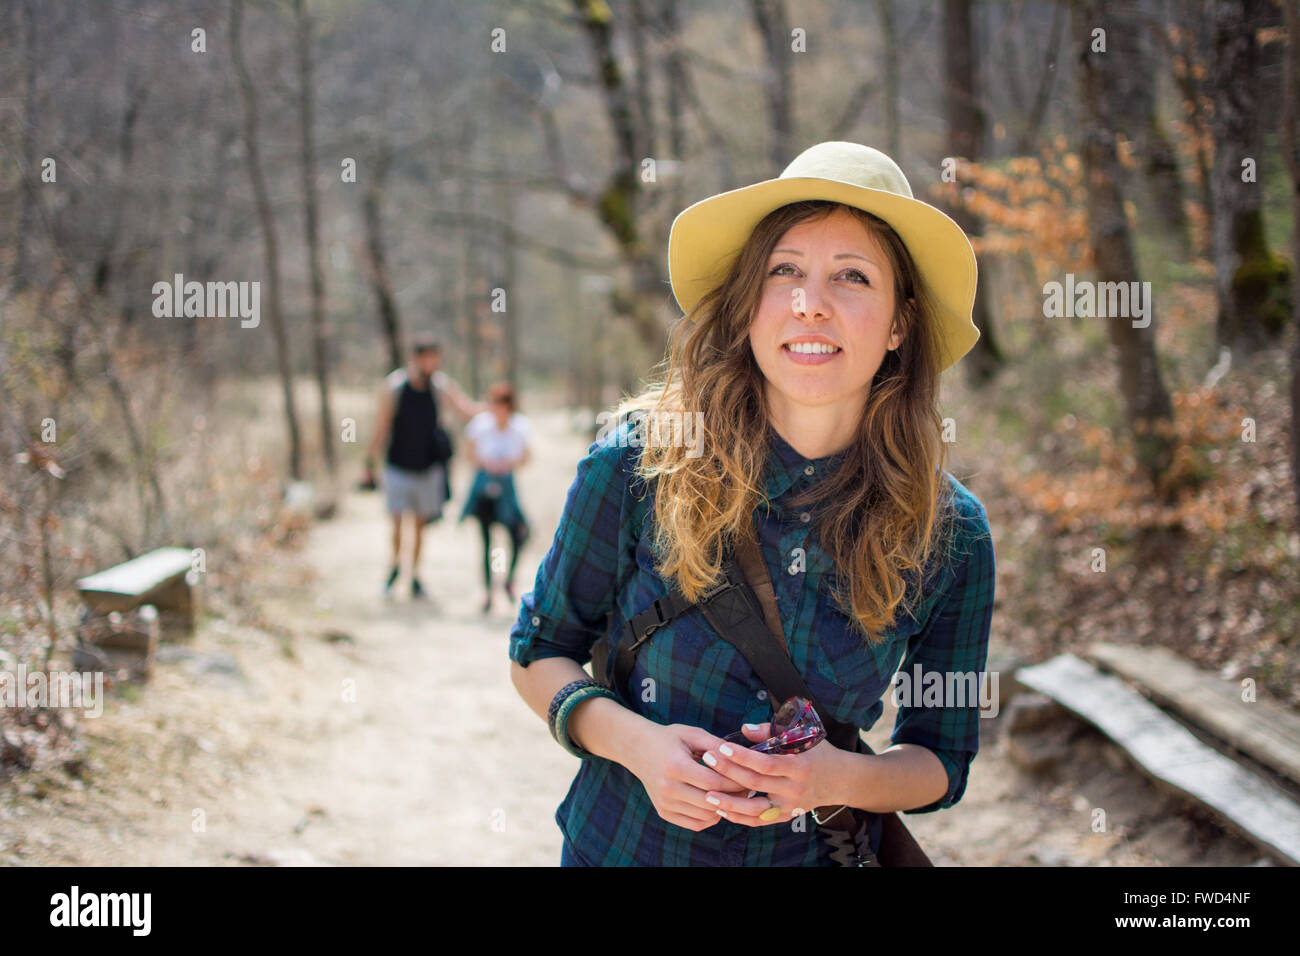 Woman hiker with backpack on a hiking trip Stock Photo